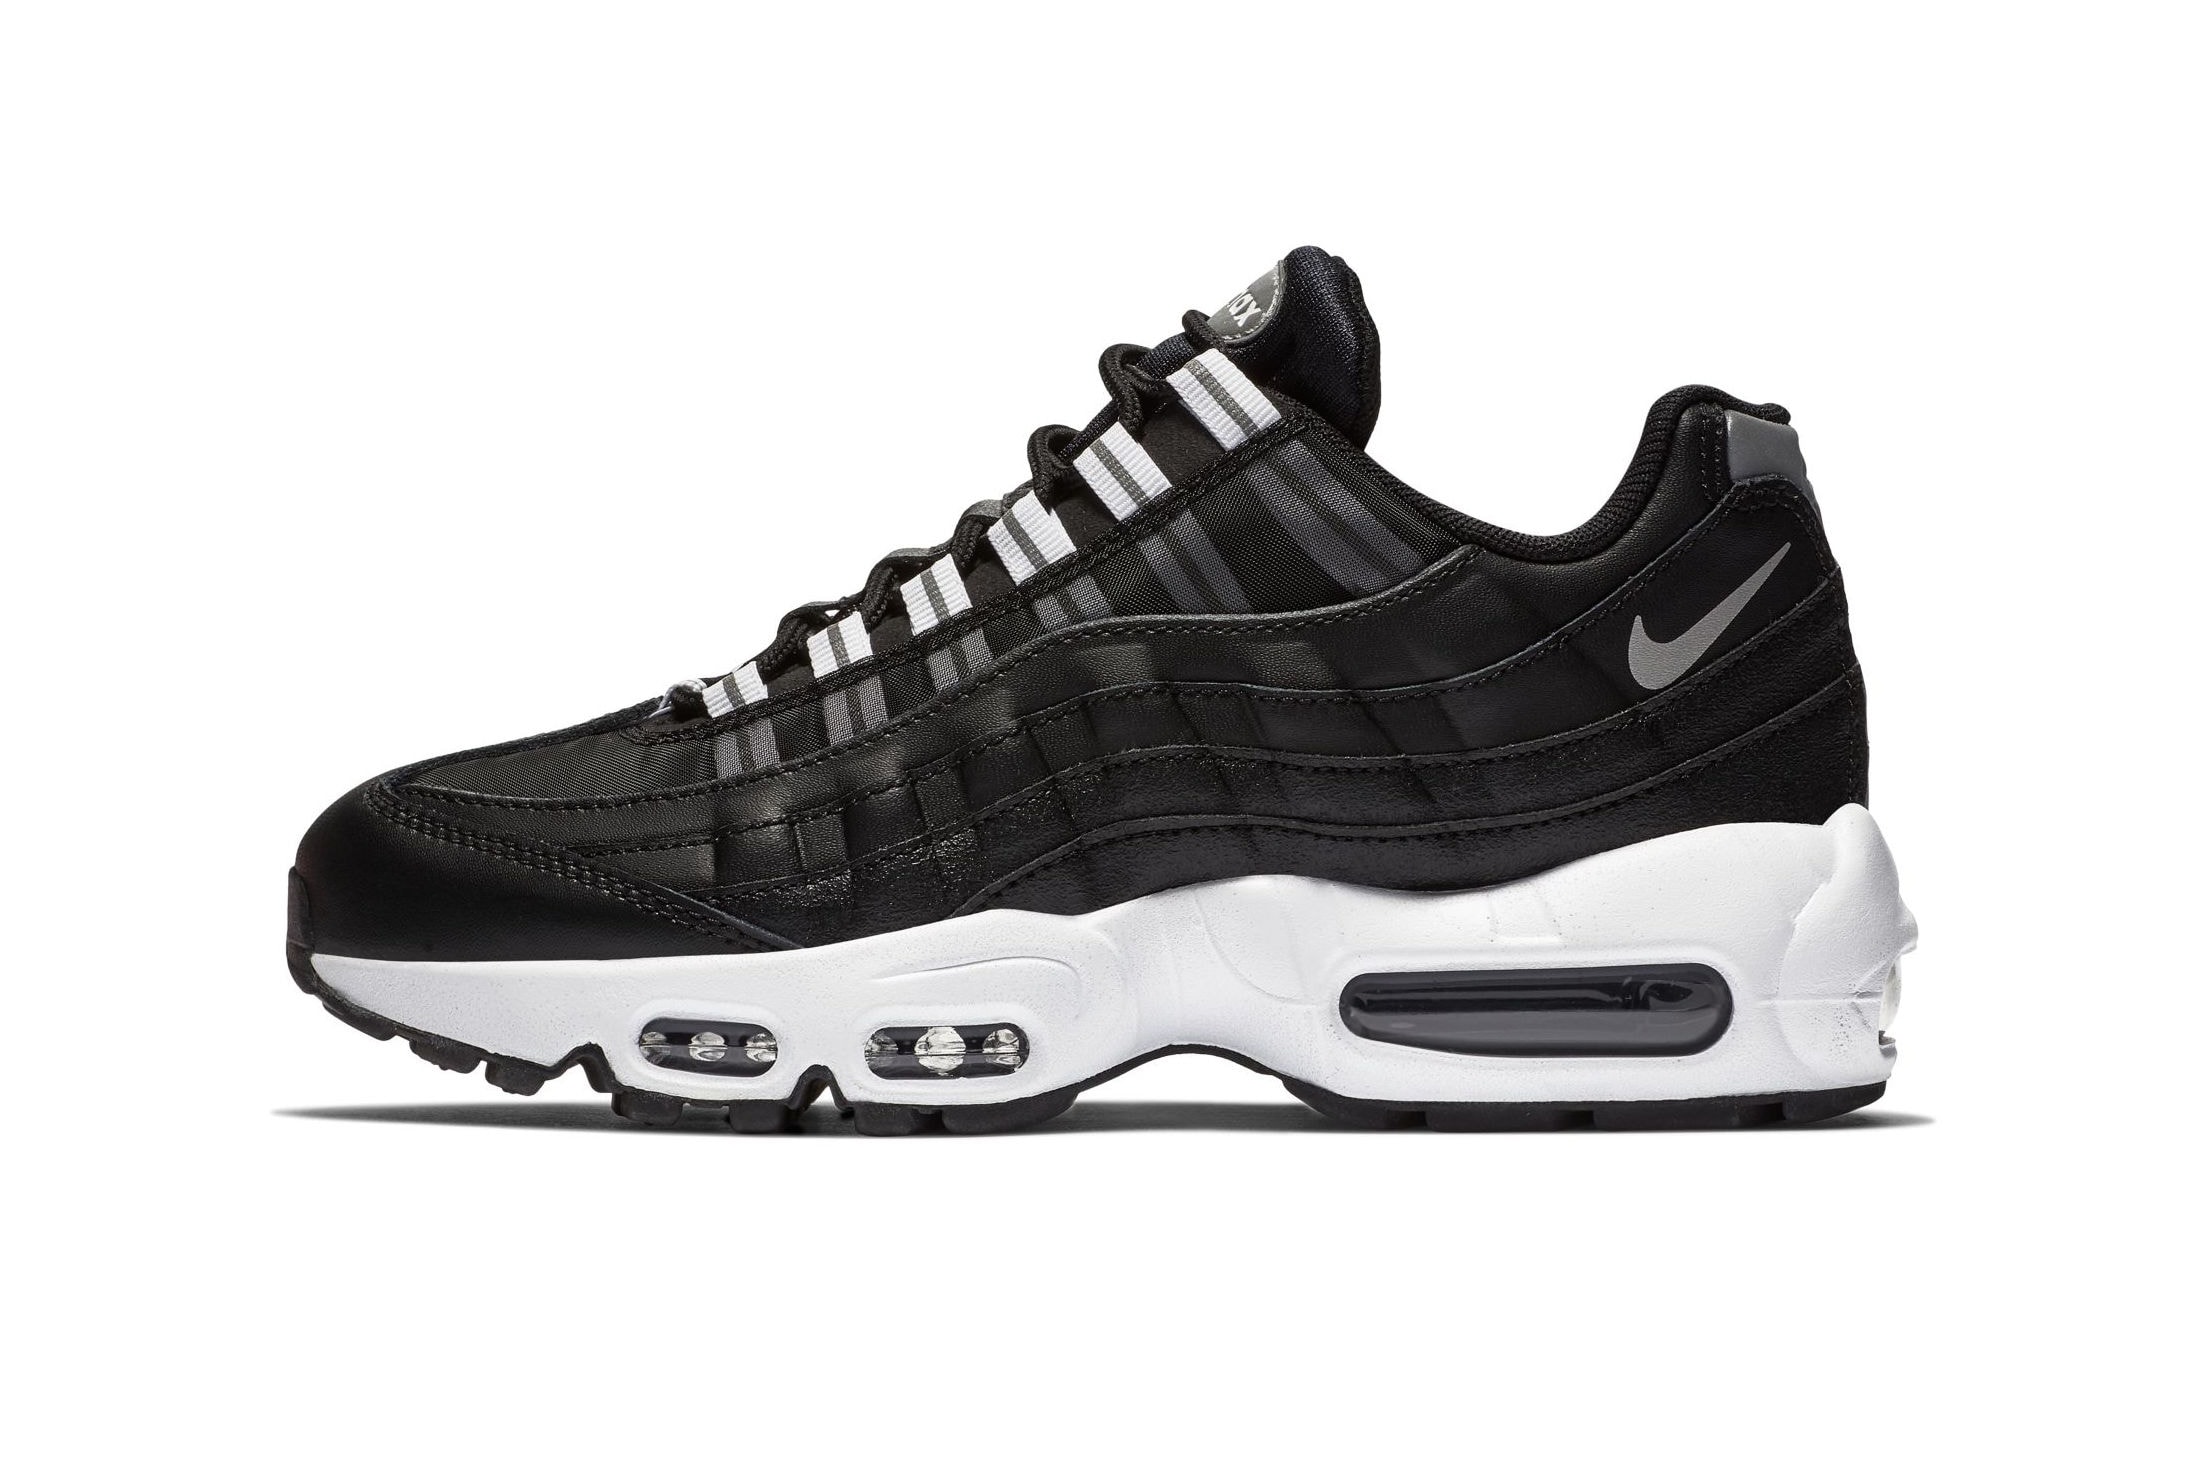 Nike Air Max 95 in Black, Reflect Silver & White